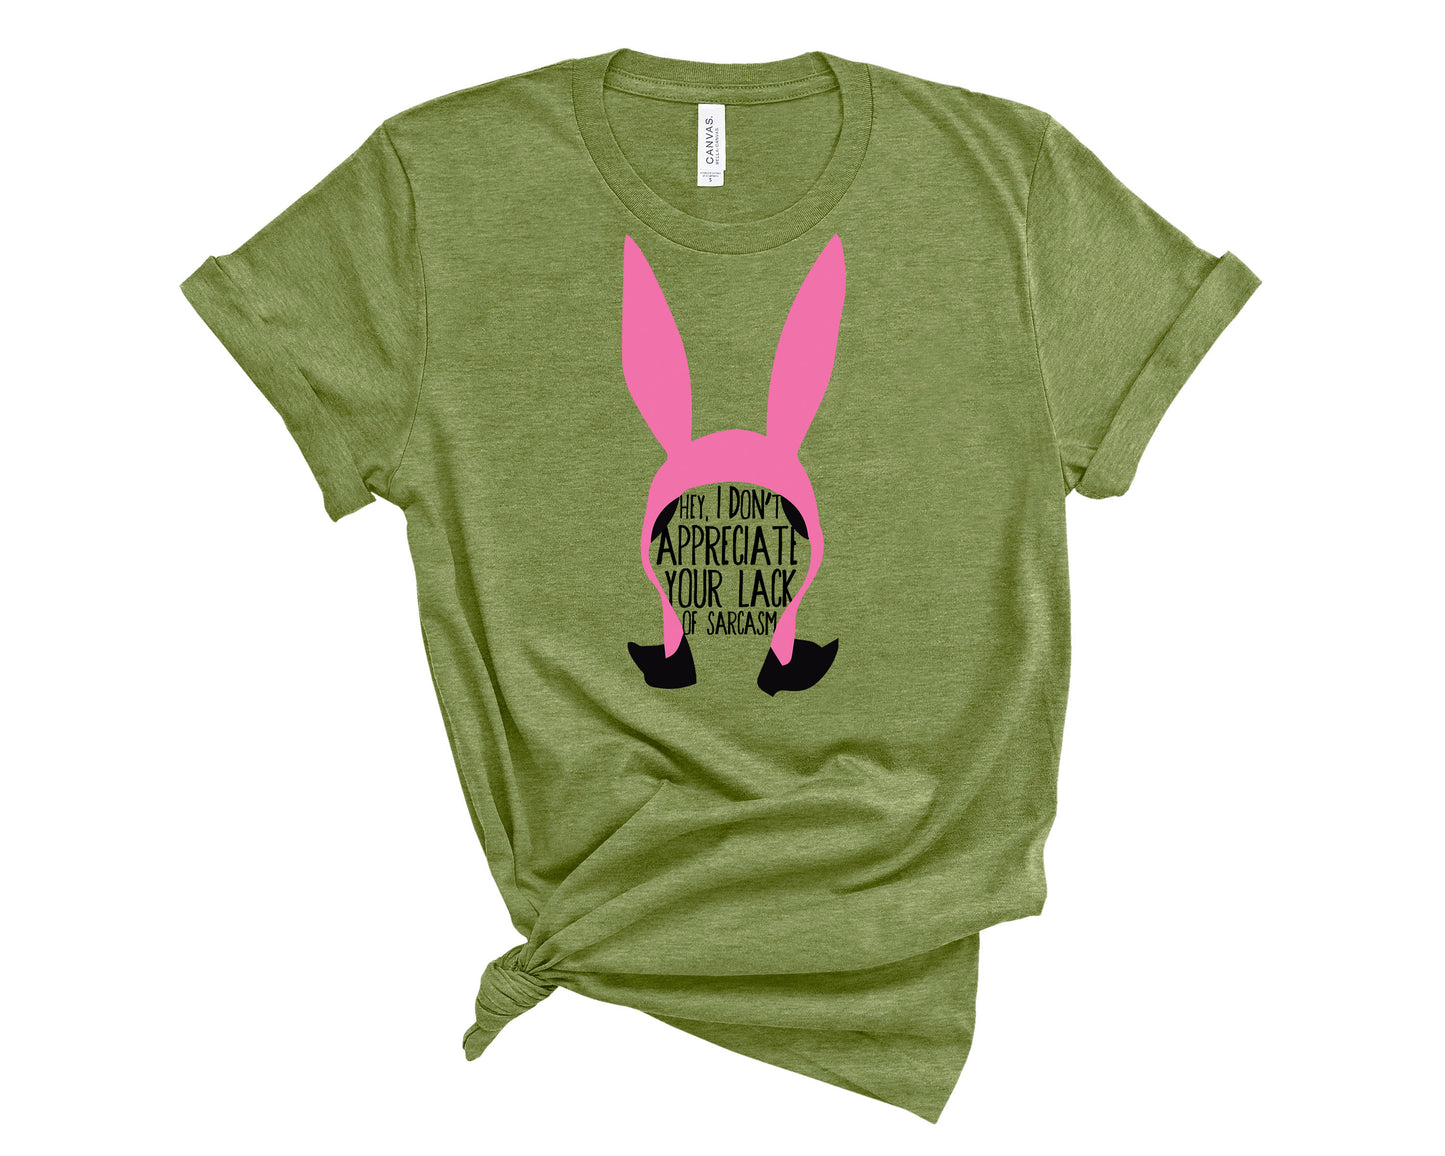 Louise Belcher - Bobs Burgers Fan - Hey, I Don't Appreciate Your Lack of Sarcasm - Unisex Adults - Funny Gift